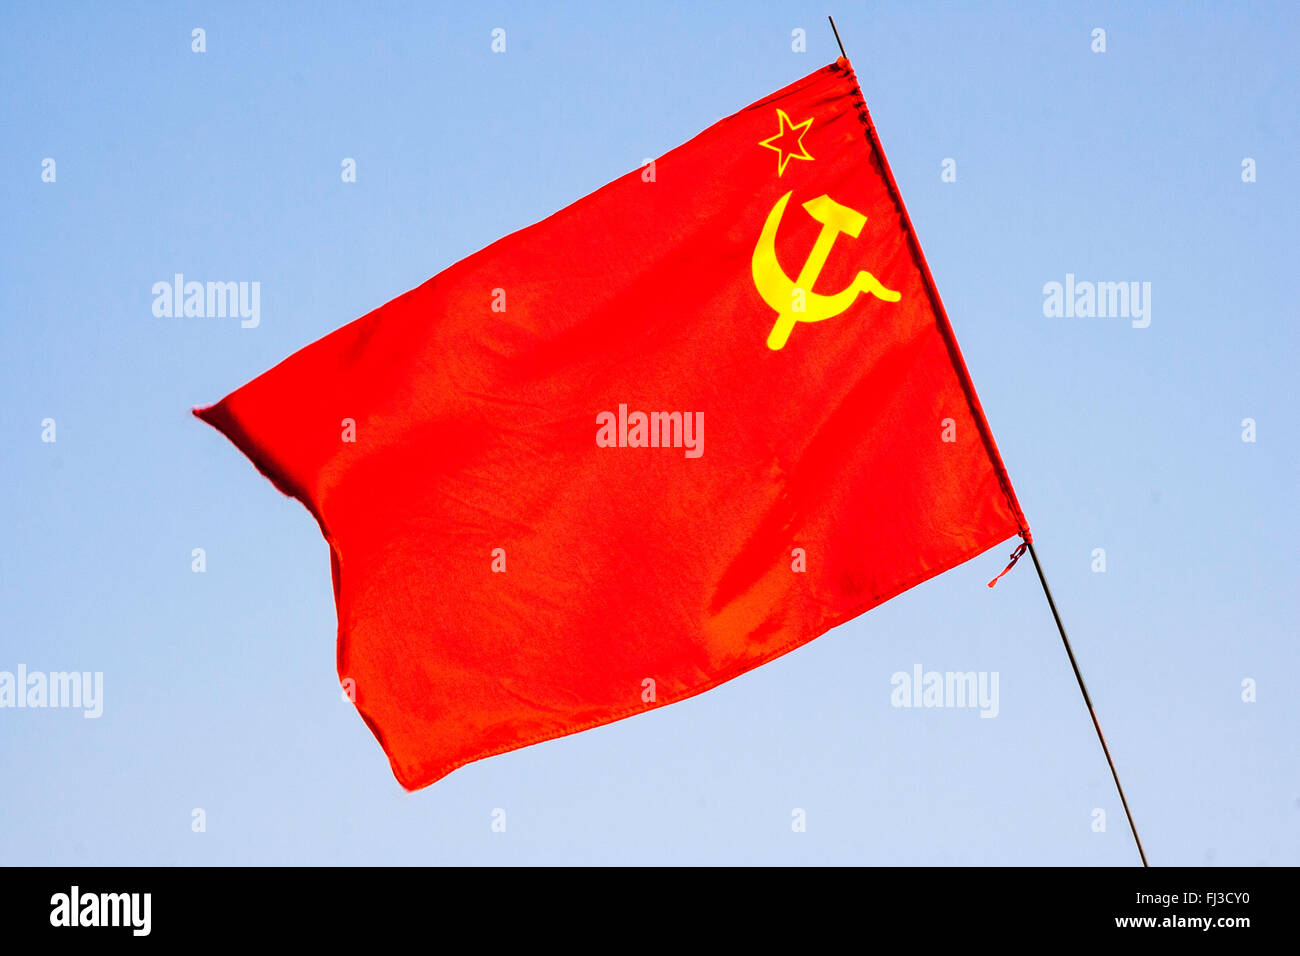 Communist flag of Russia, USSR, red flag, hammer and sickle in yellow, against plain blue sky background Stock Photo